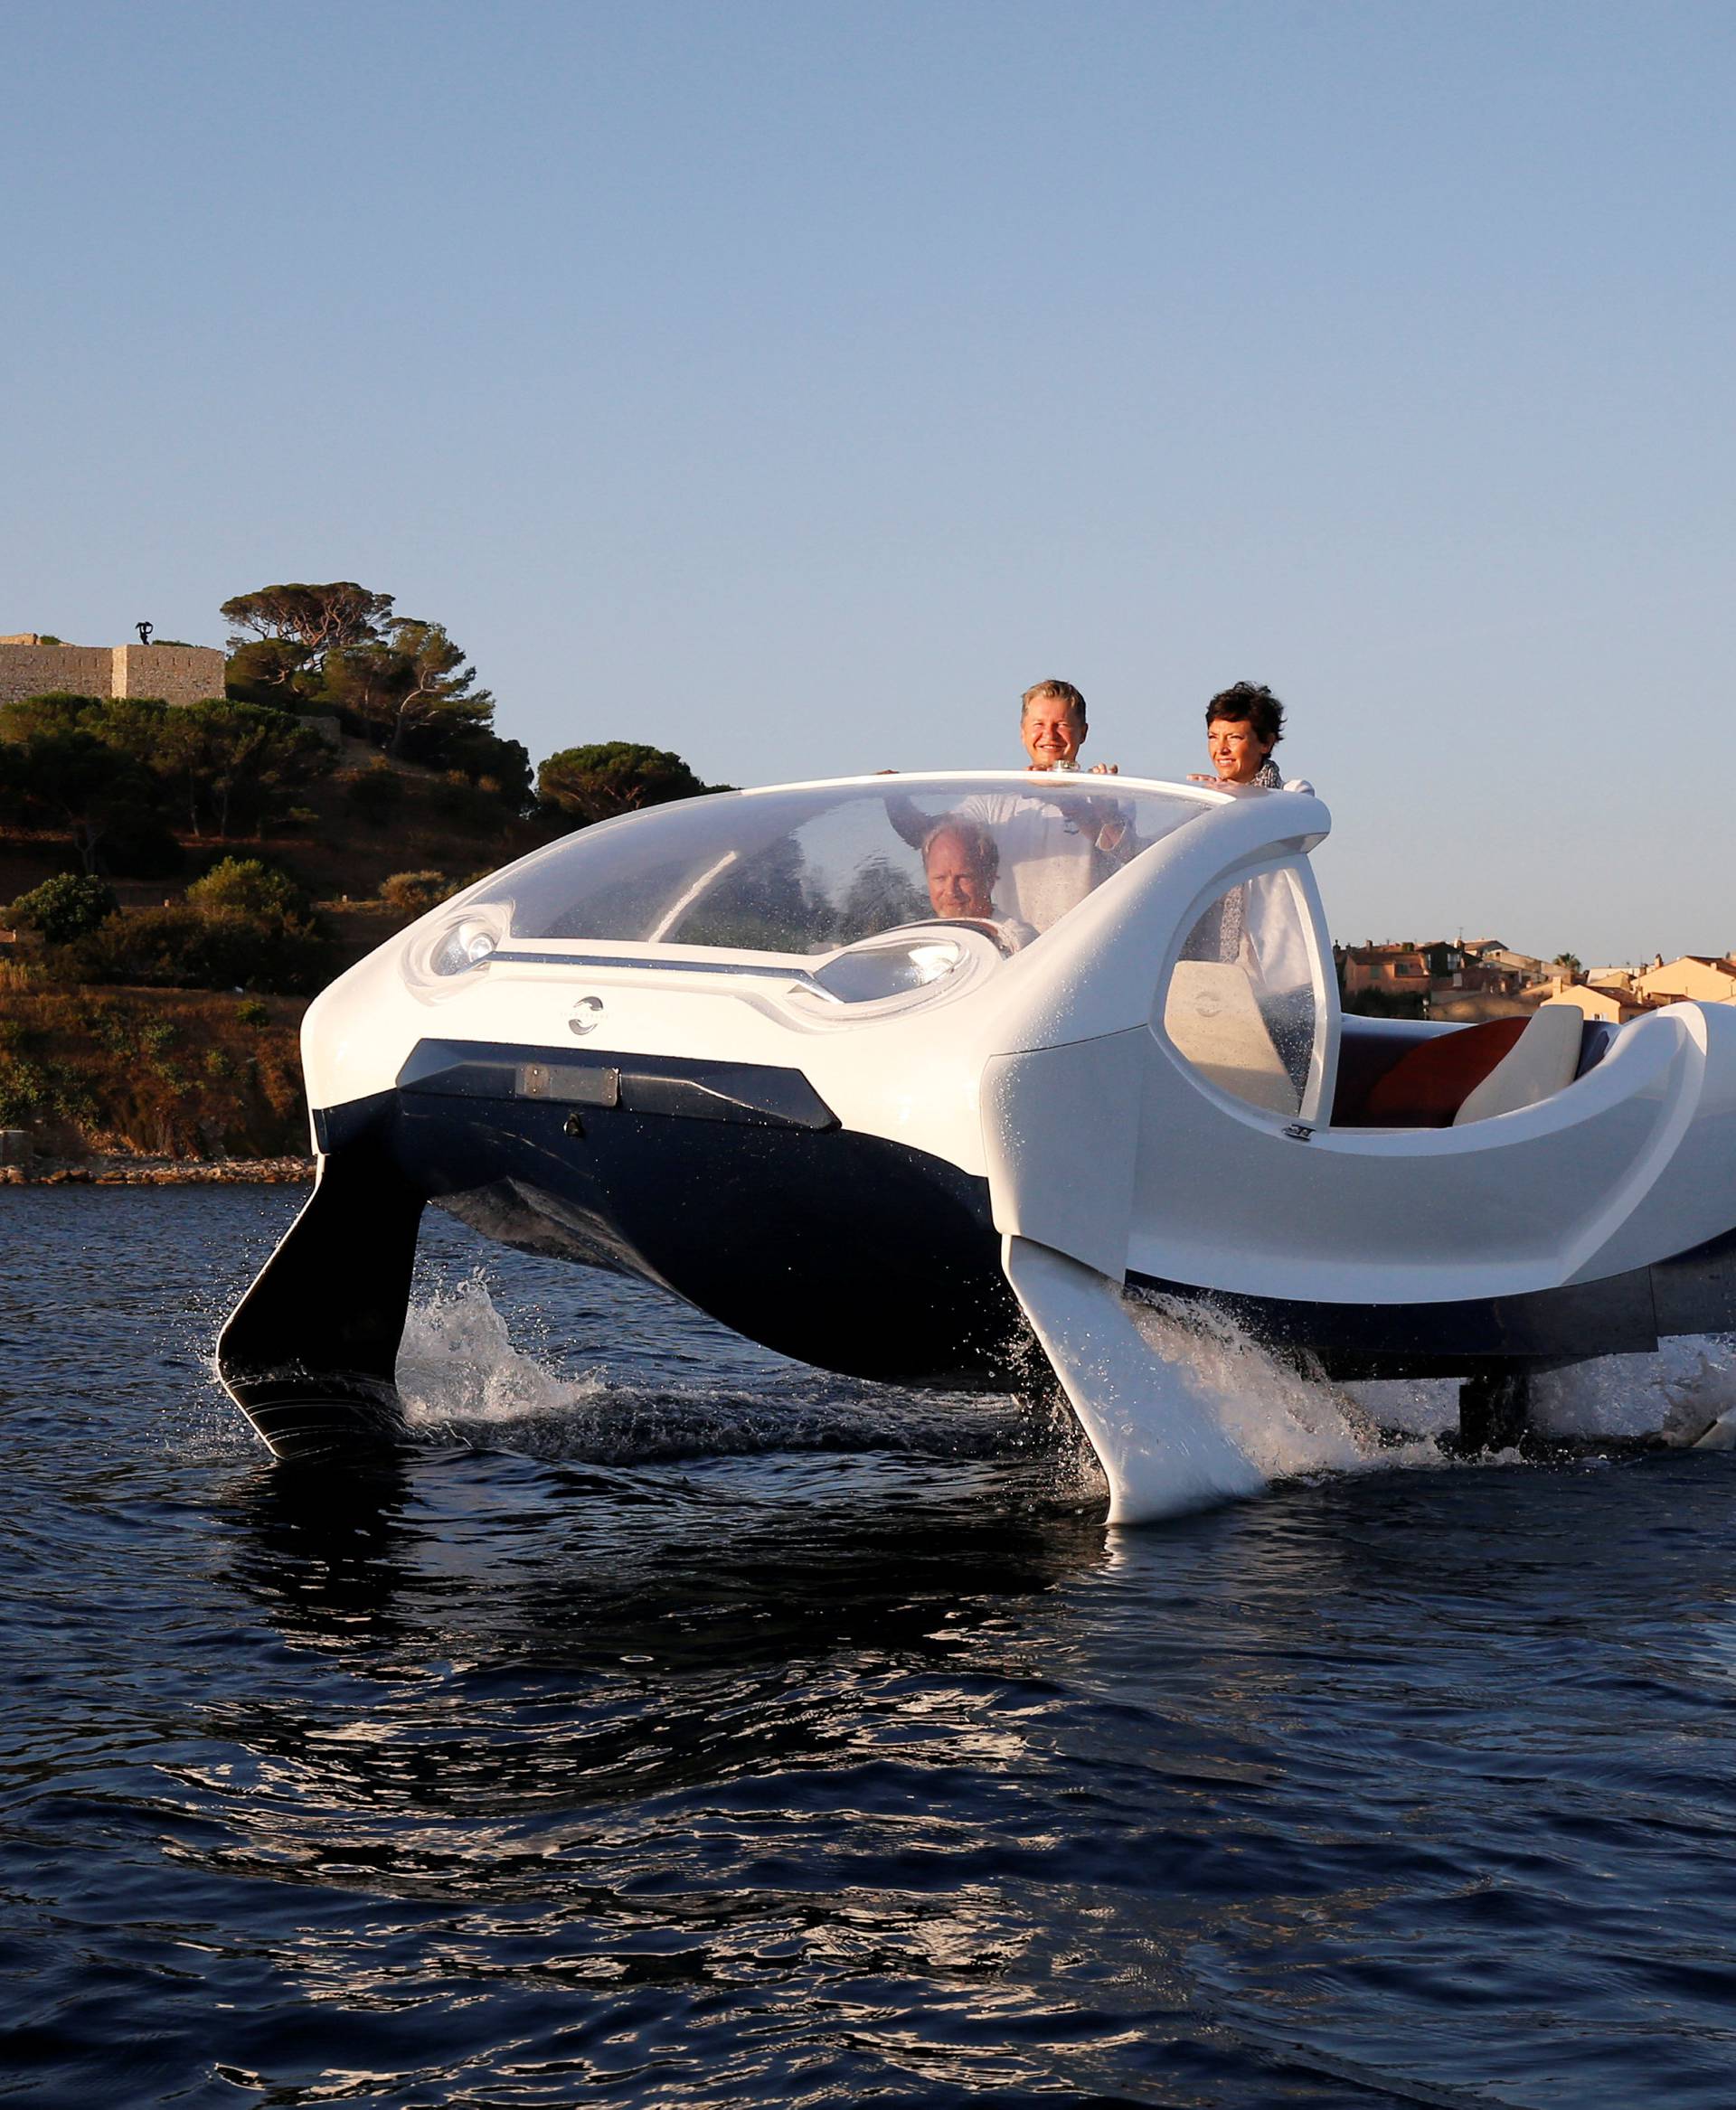 SeaBubbles' water taxi prototype is presented in the harbour of Saint-Tropez